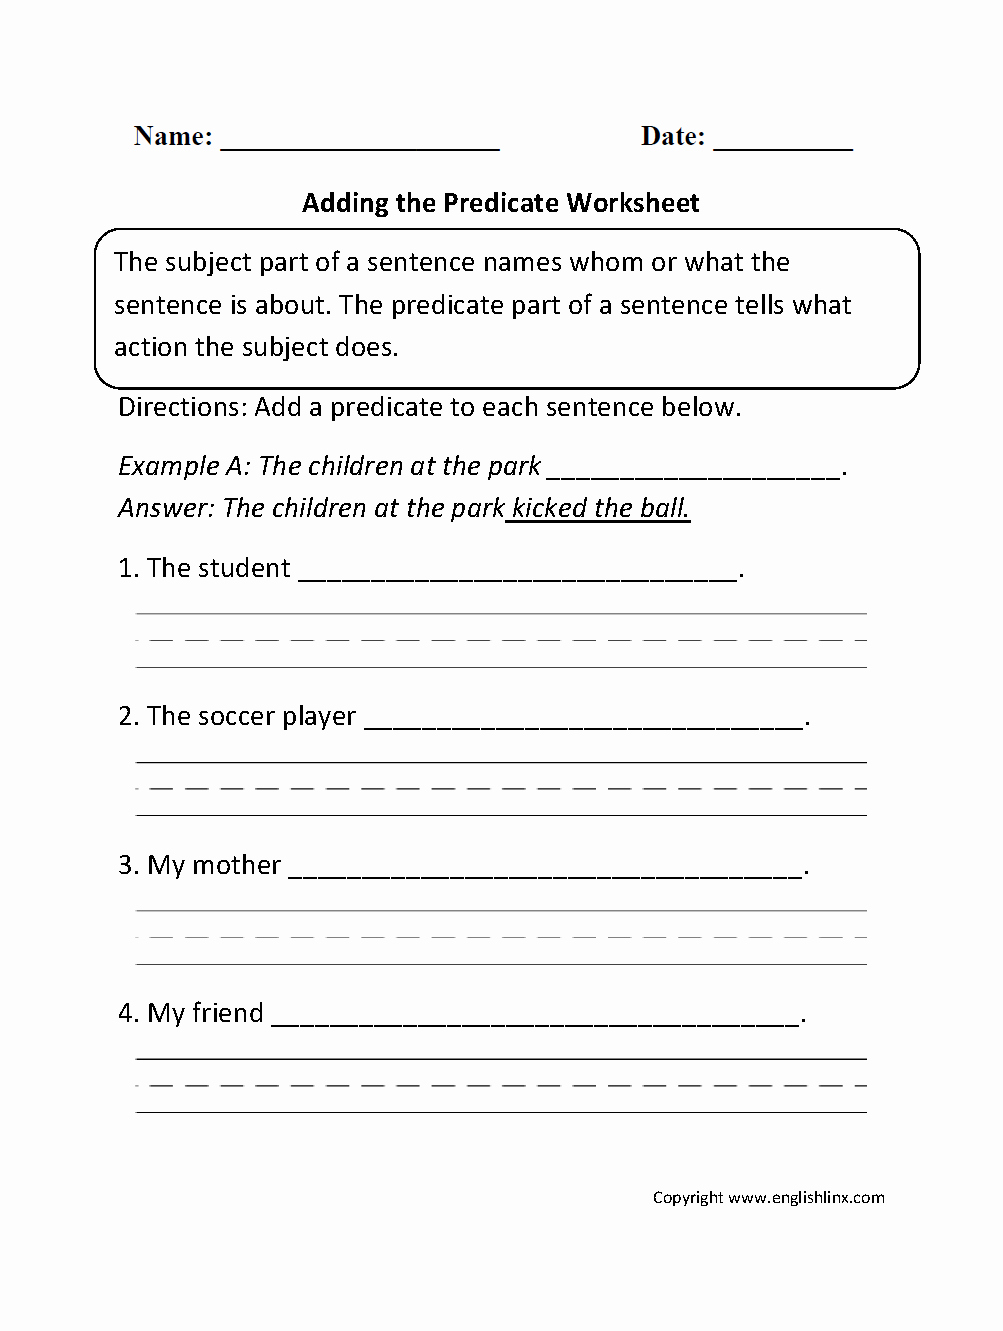 Free Subject and Predicate Worksheets Luxury Free Printable Subject Predicate Worksheets 2nd Grade